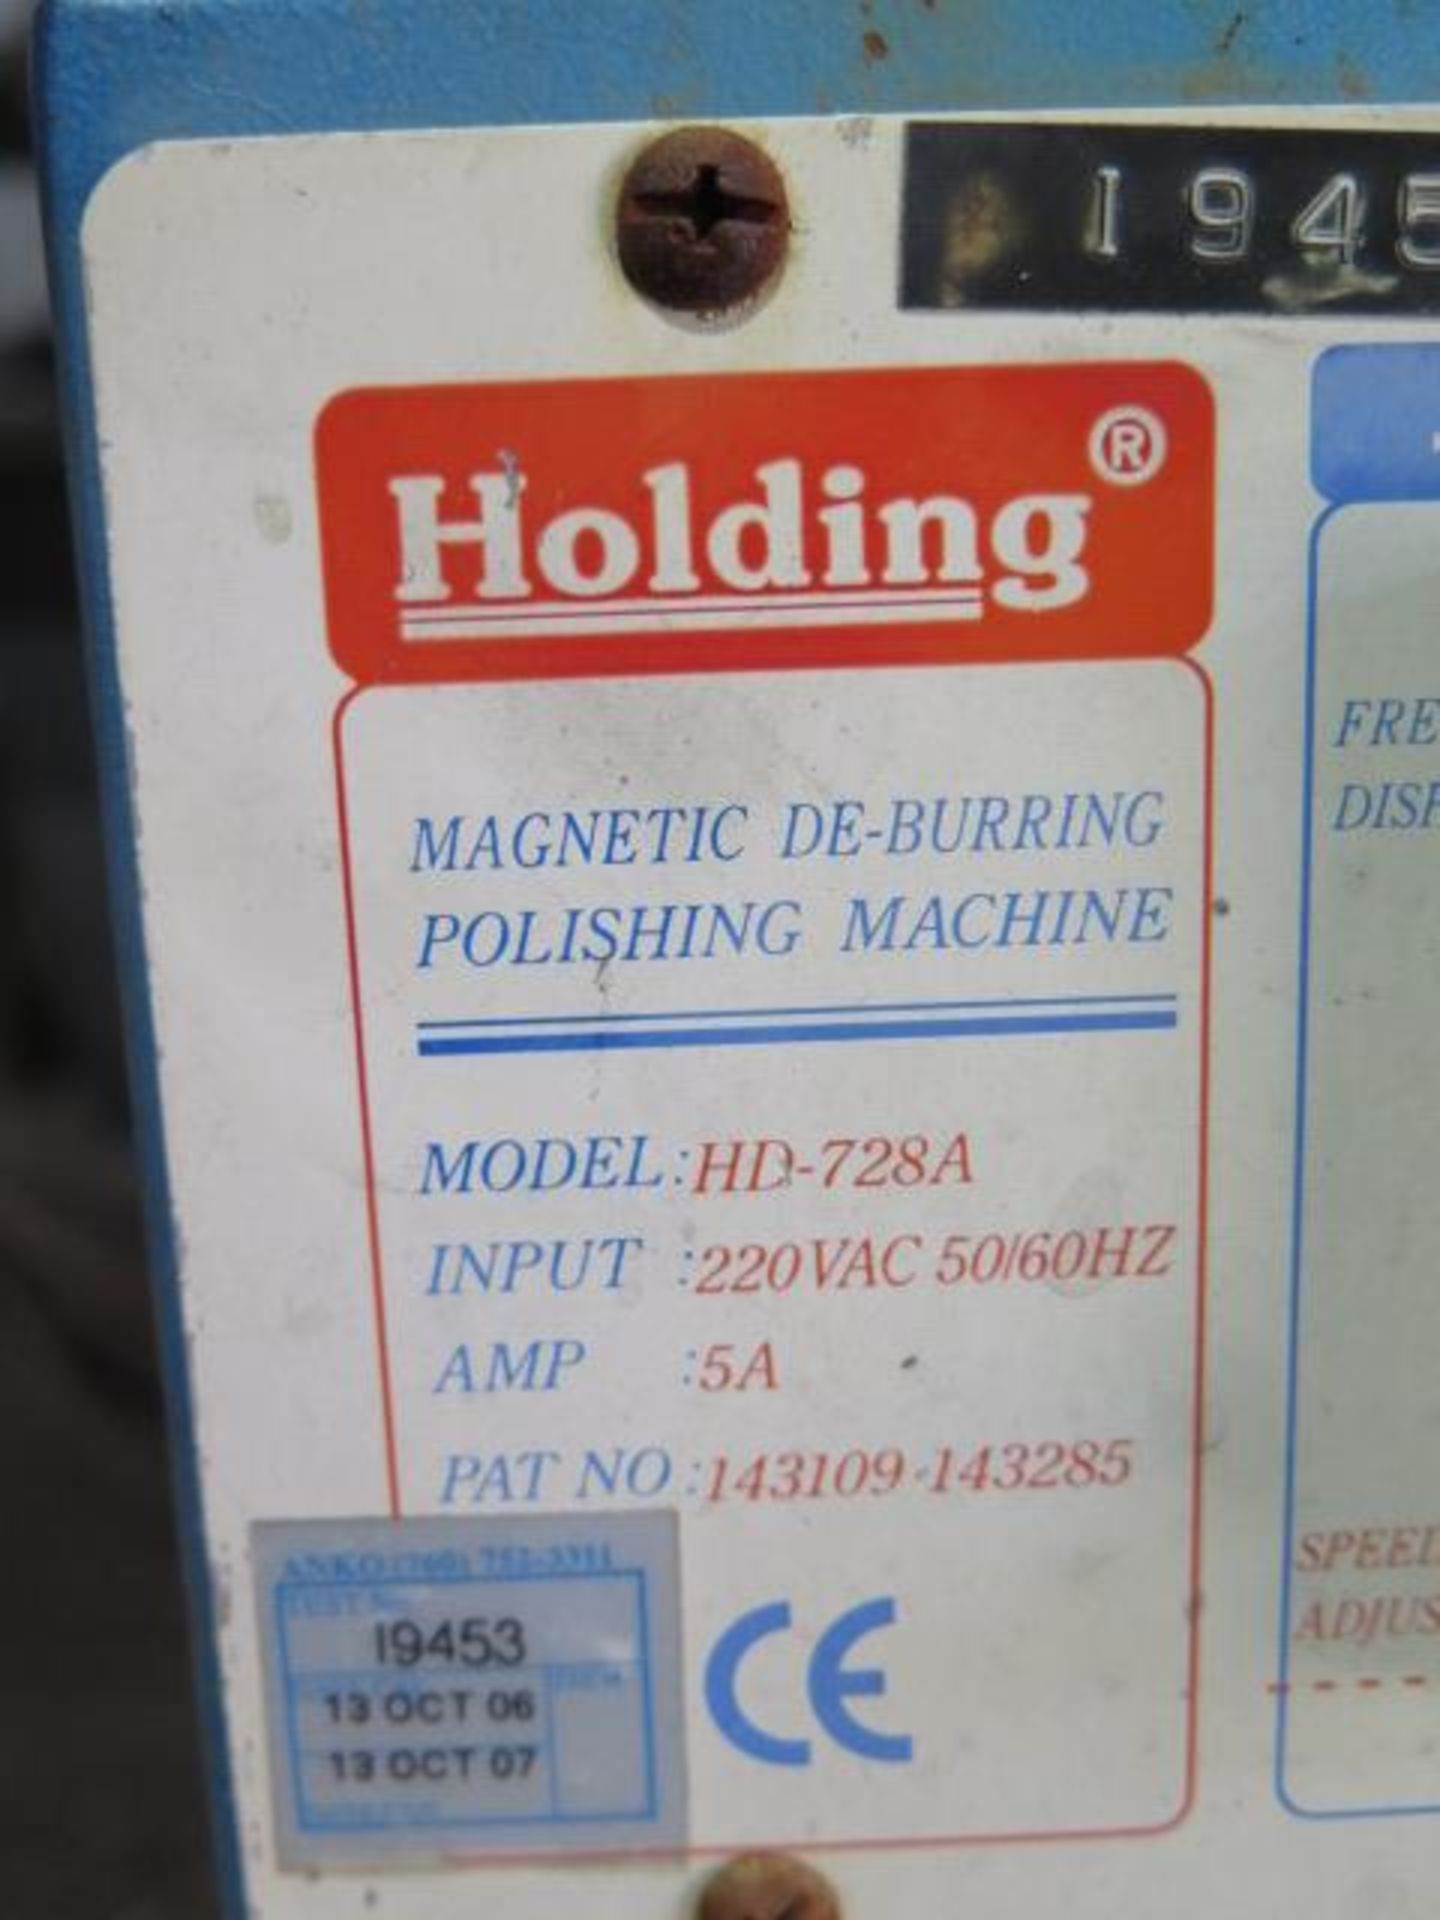 Earh-Chain “sPINner i9453” mdl. HD-728A Holding Magnetic Deburring and Polishing Machine (SOLD AS-IS - Image 8 of 8